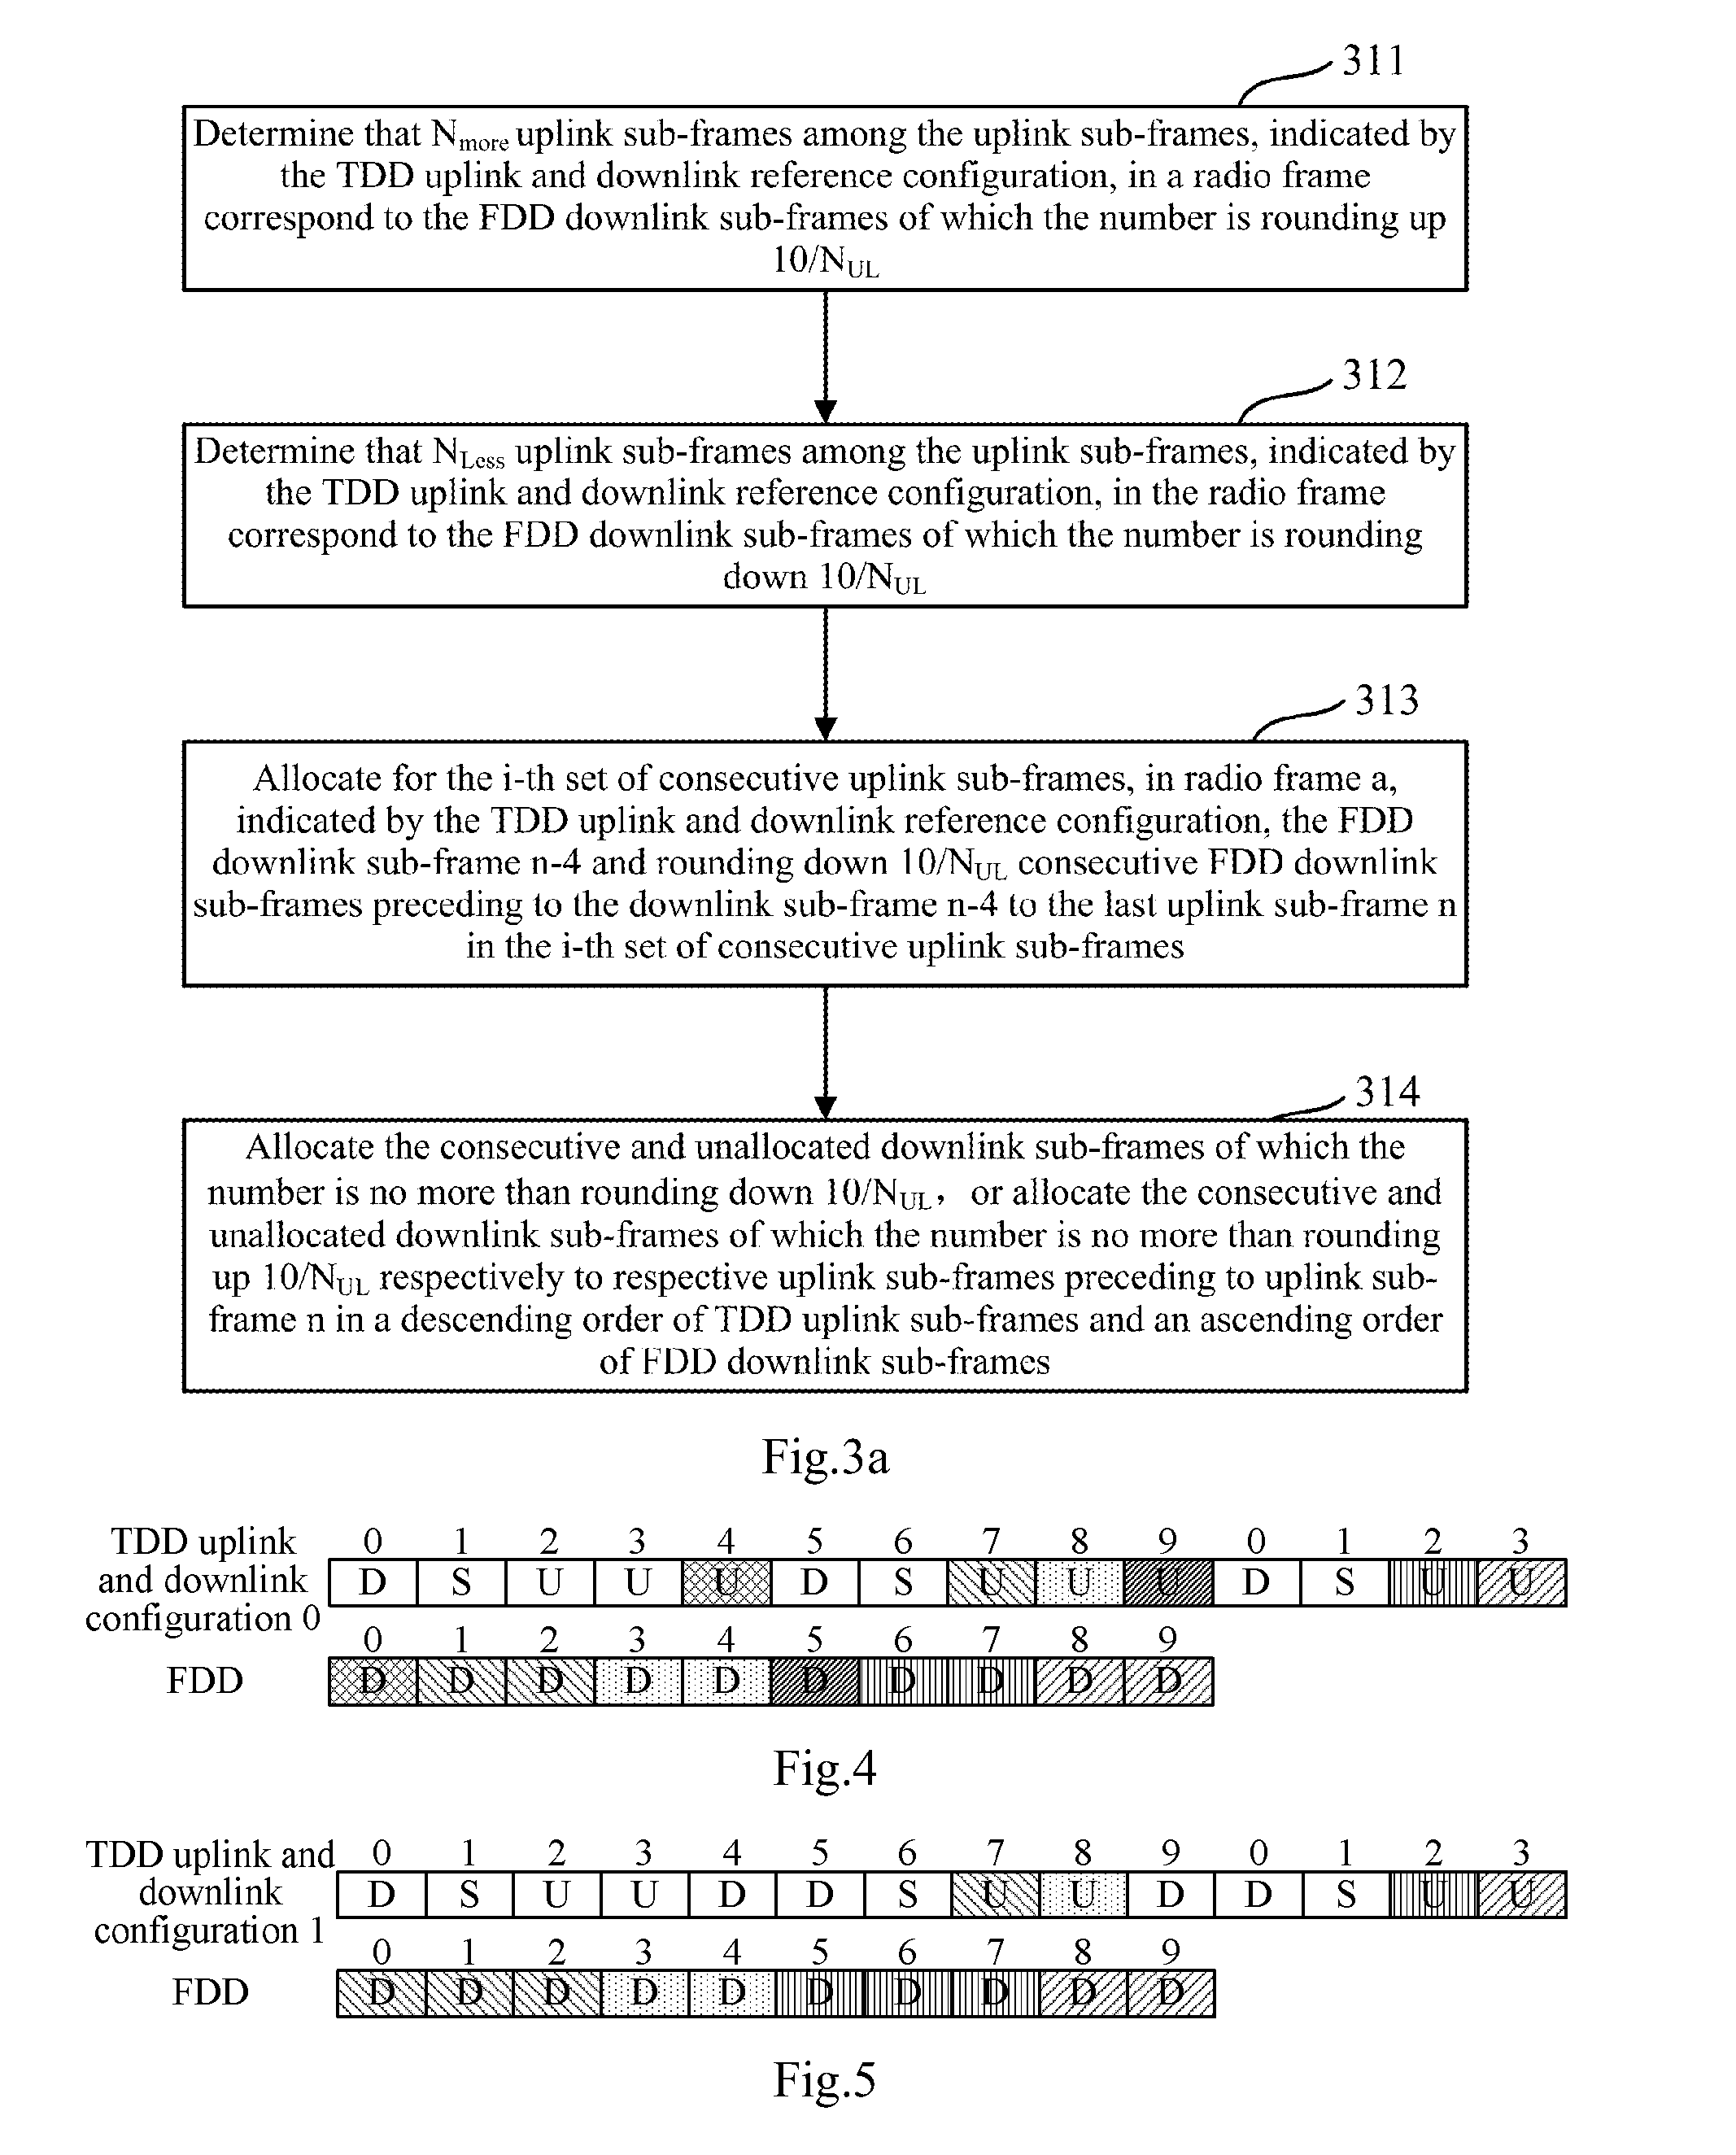 Method for implementing HARQ feedback, and method and device for allocating uplink subframe